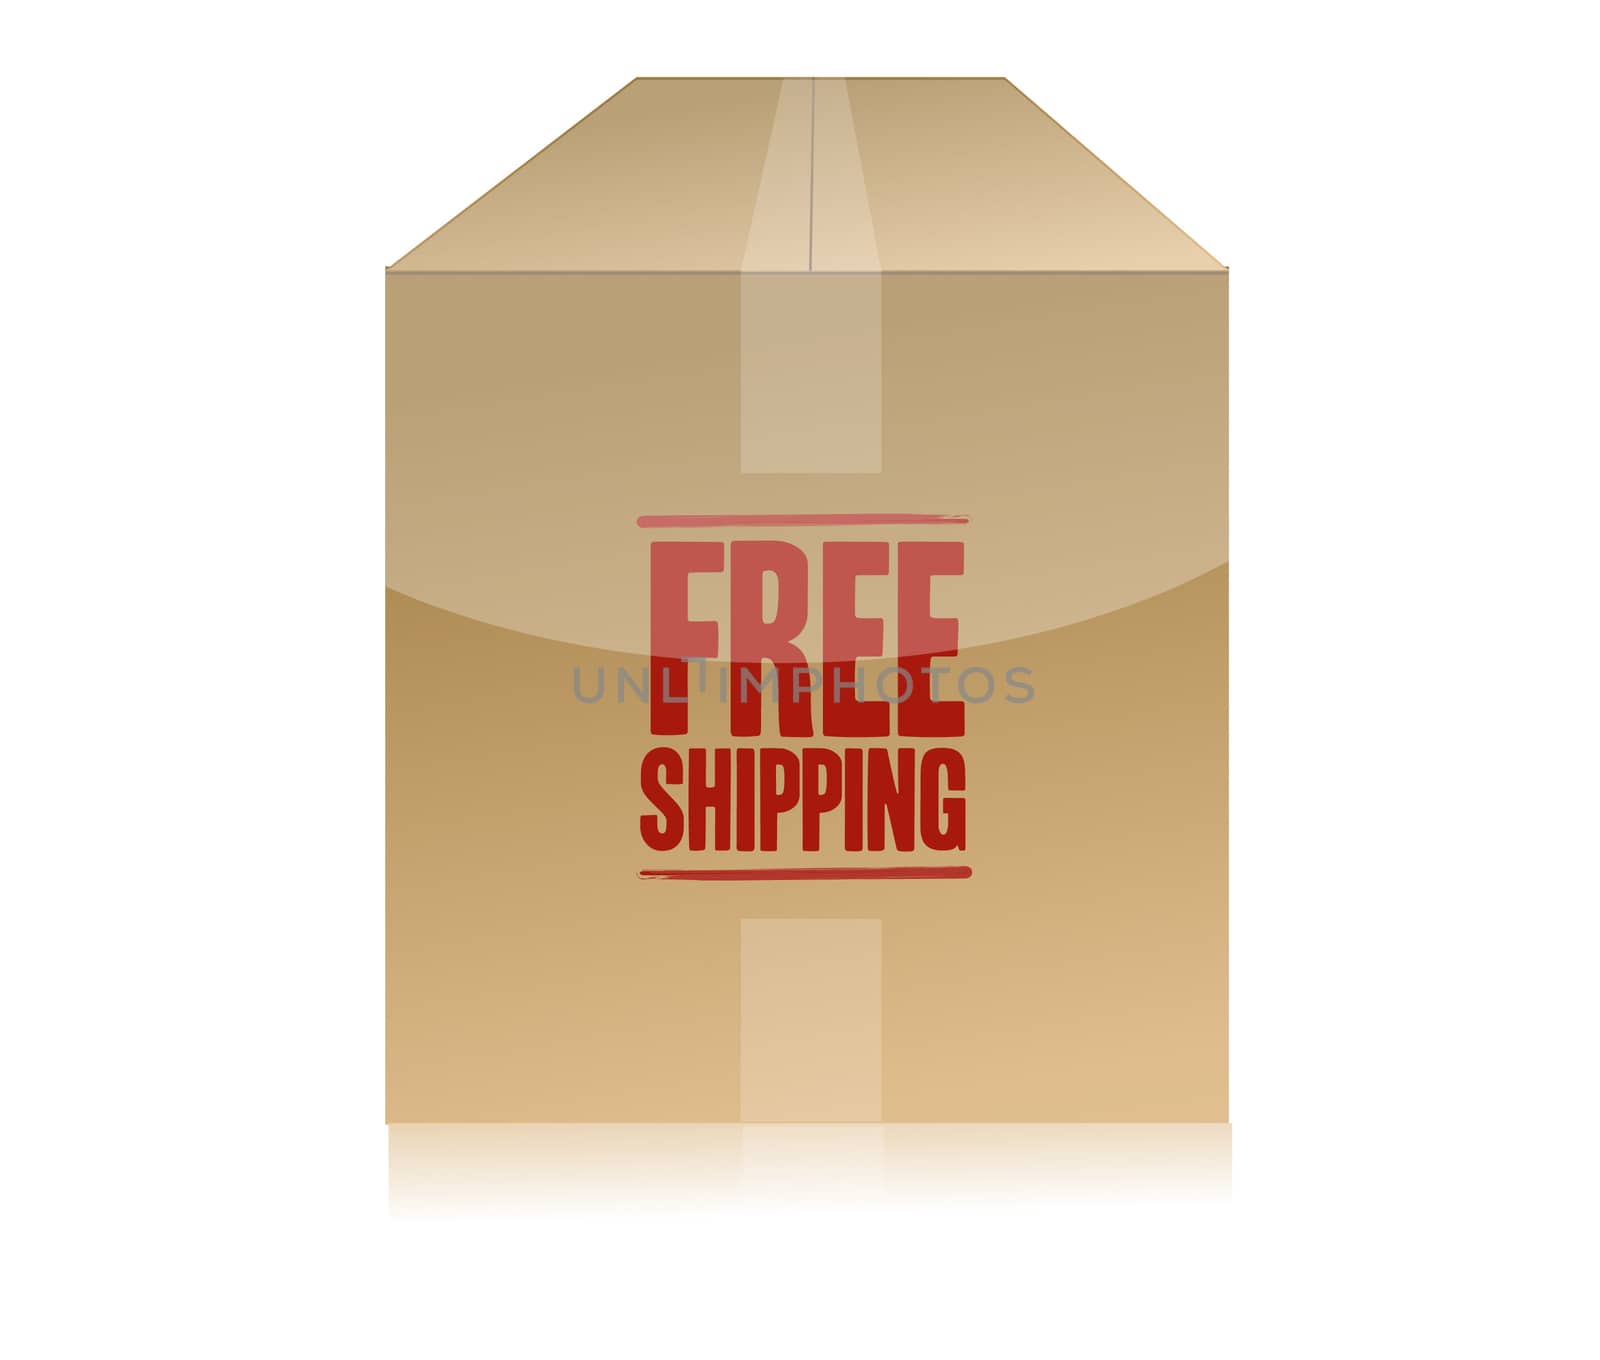 free shipping box illustration design isolated over a white background